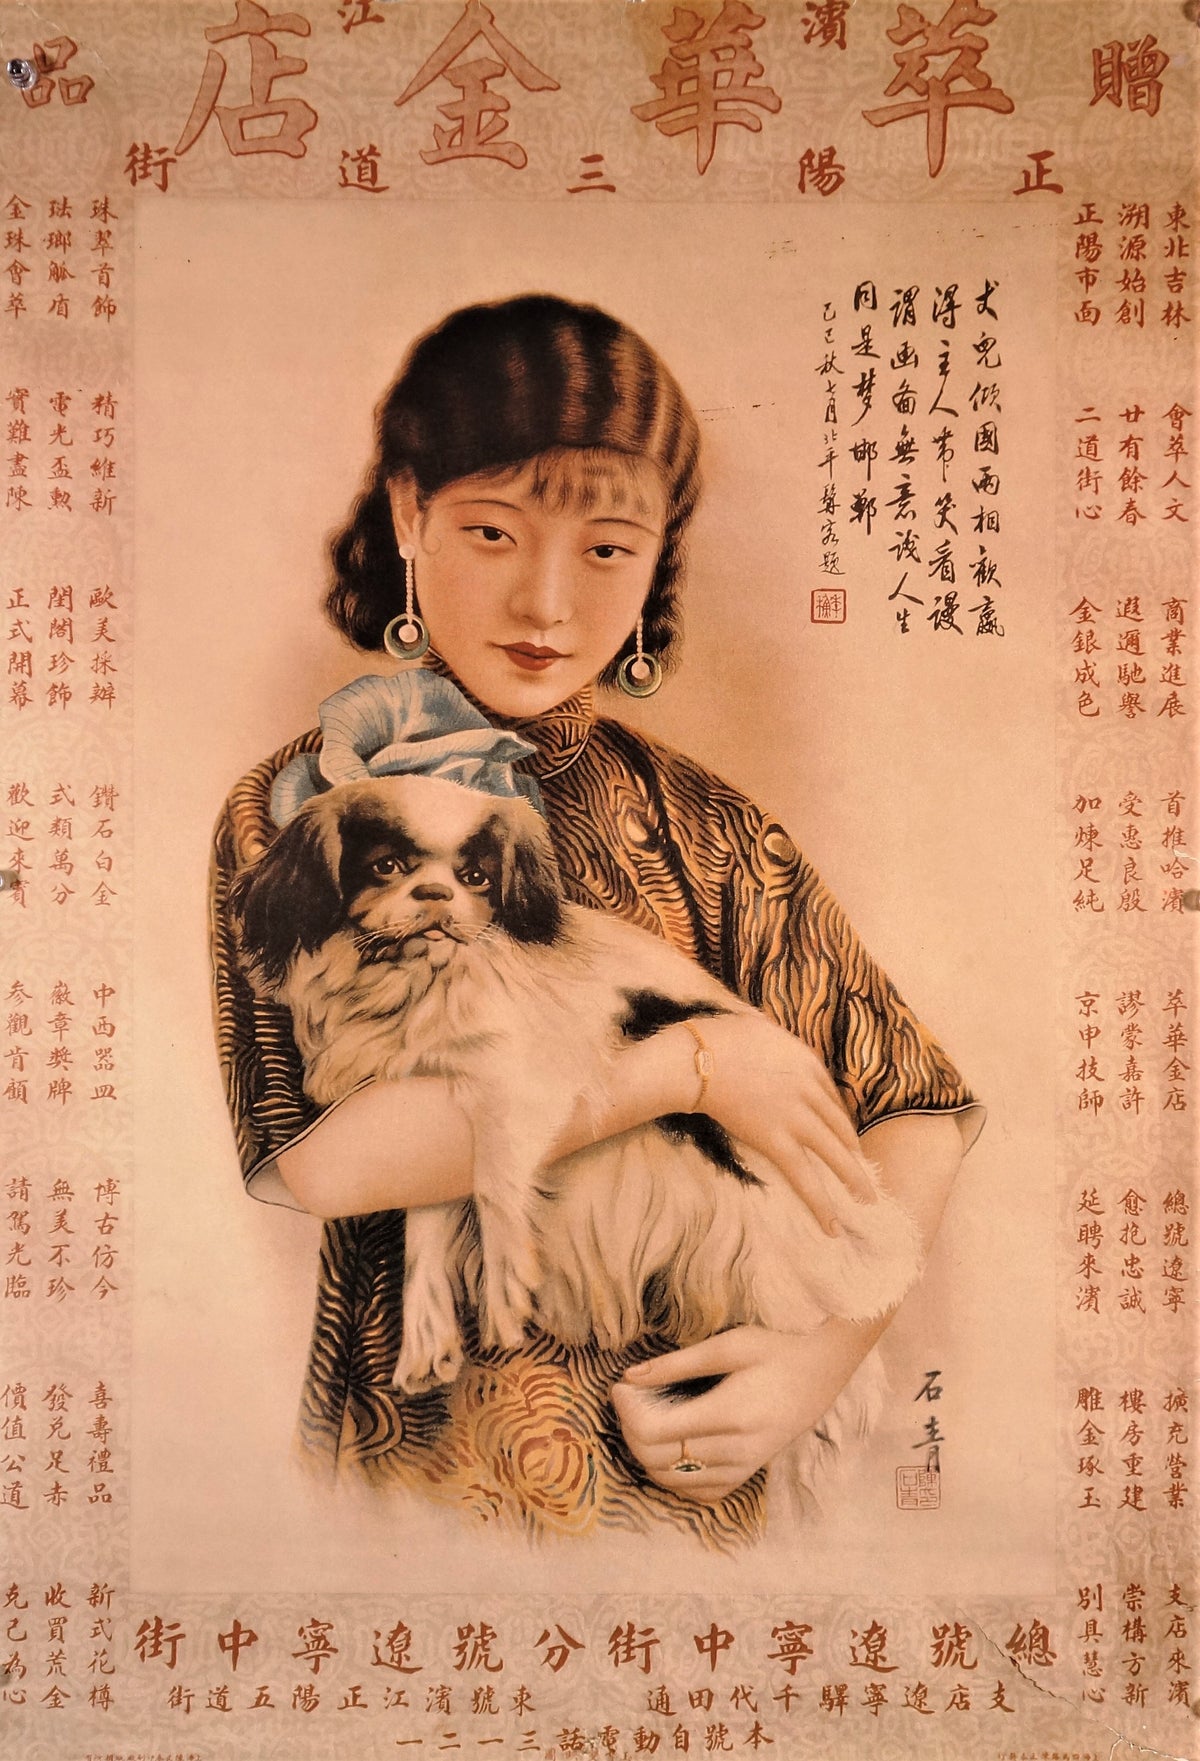 Traditional Chinese Poster - Authentic Vintage Poster